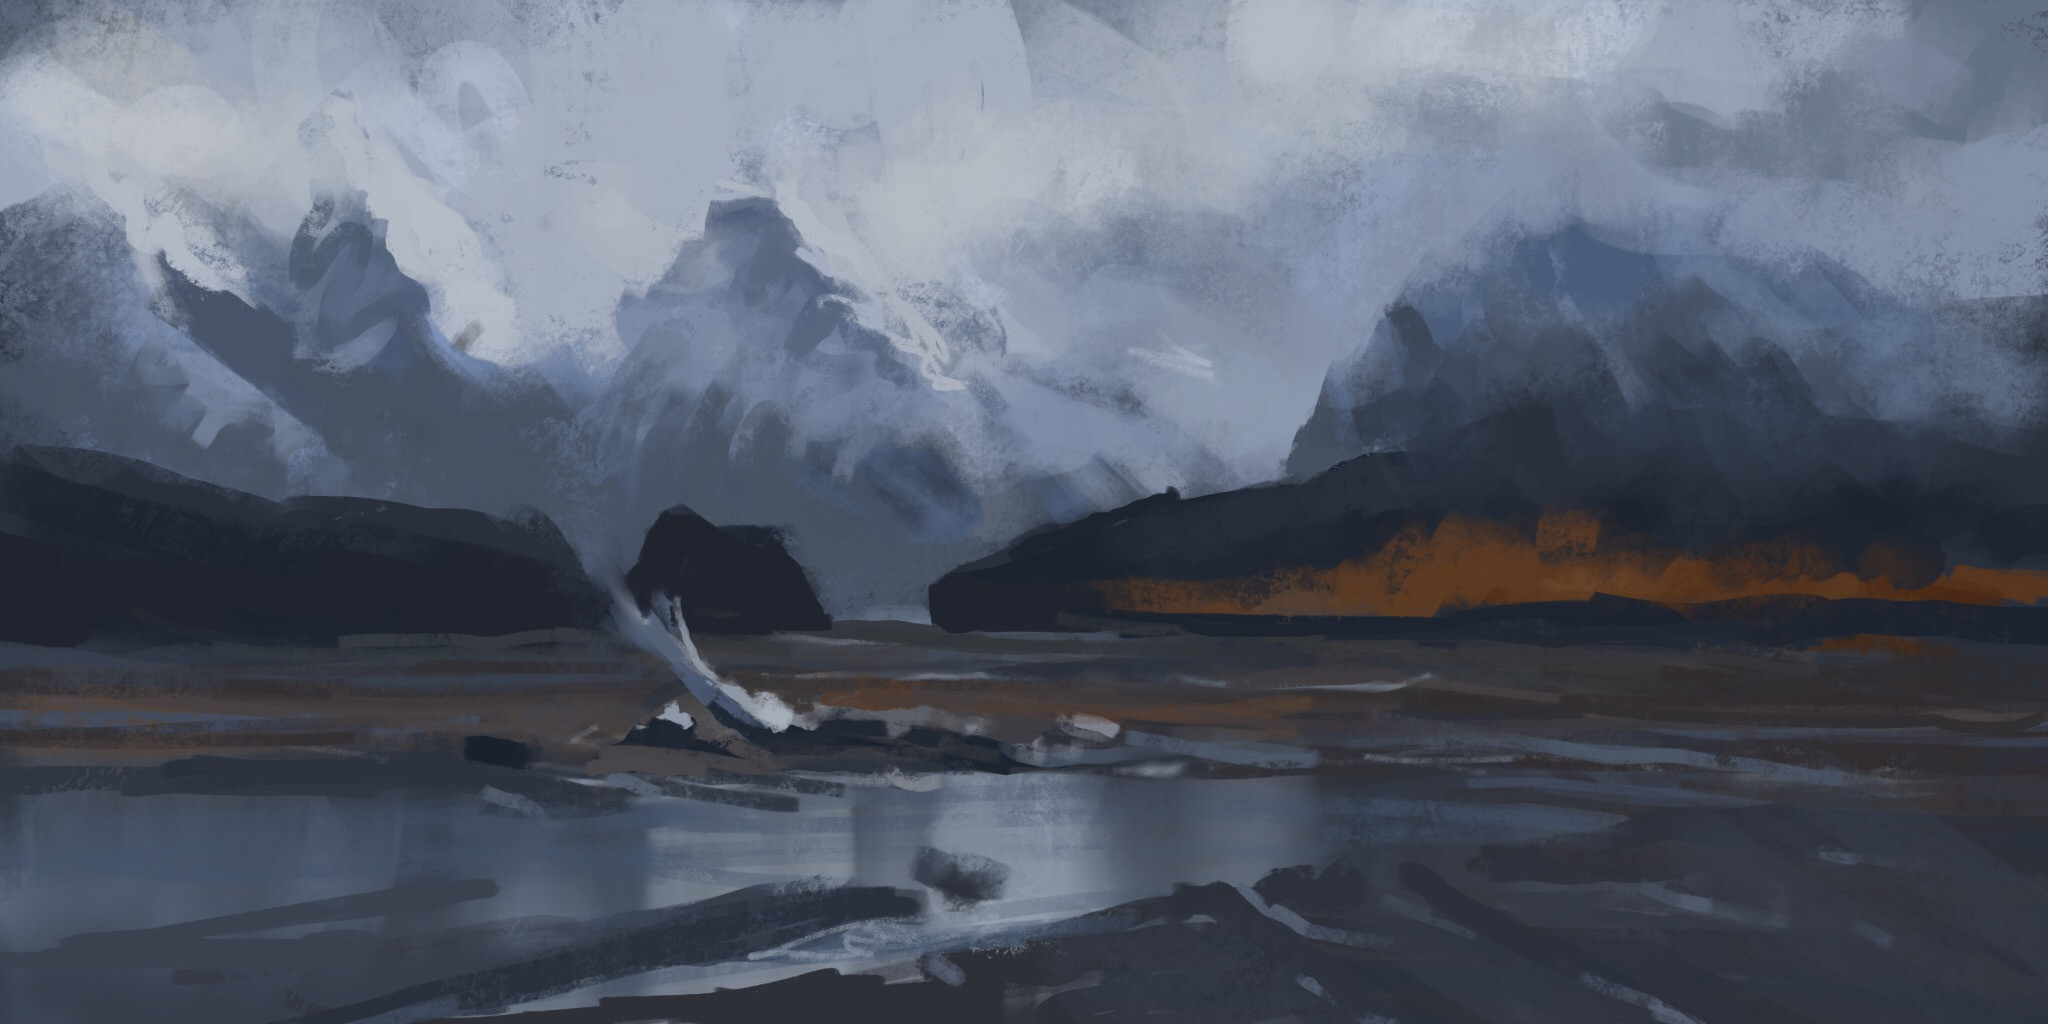 Painting based on John Crum painting (Not original for practice)